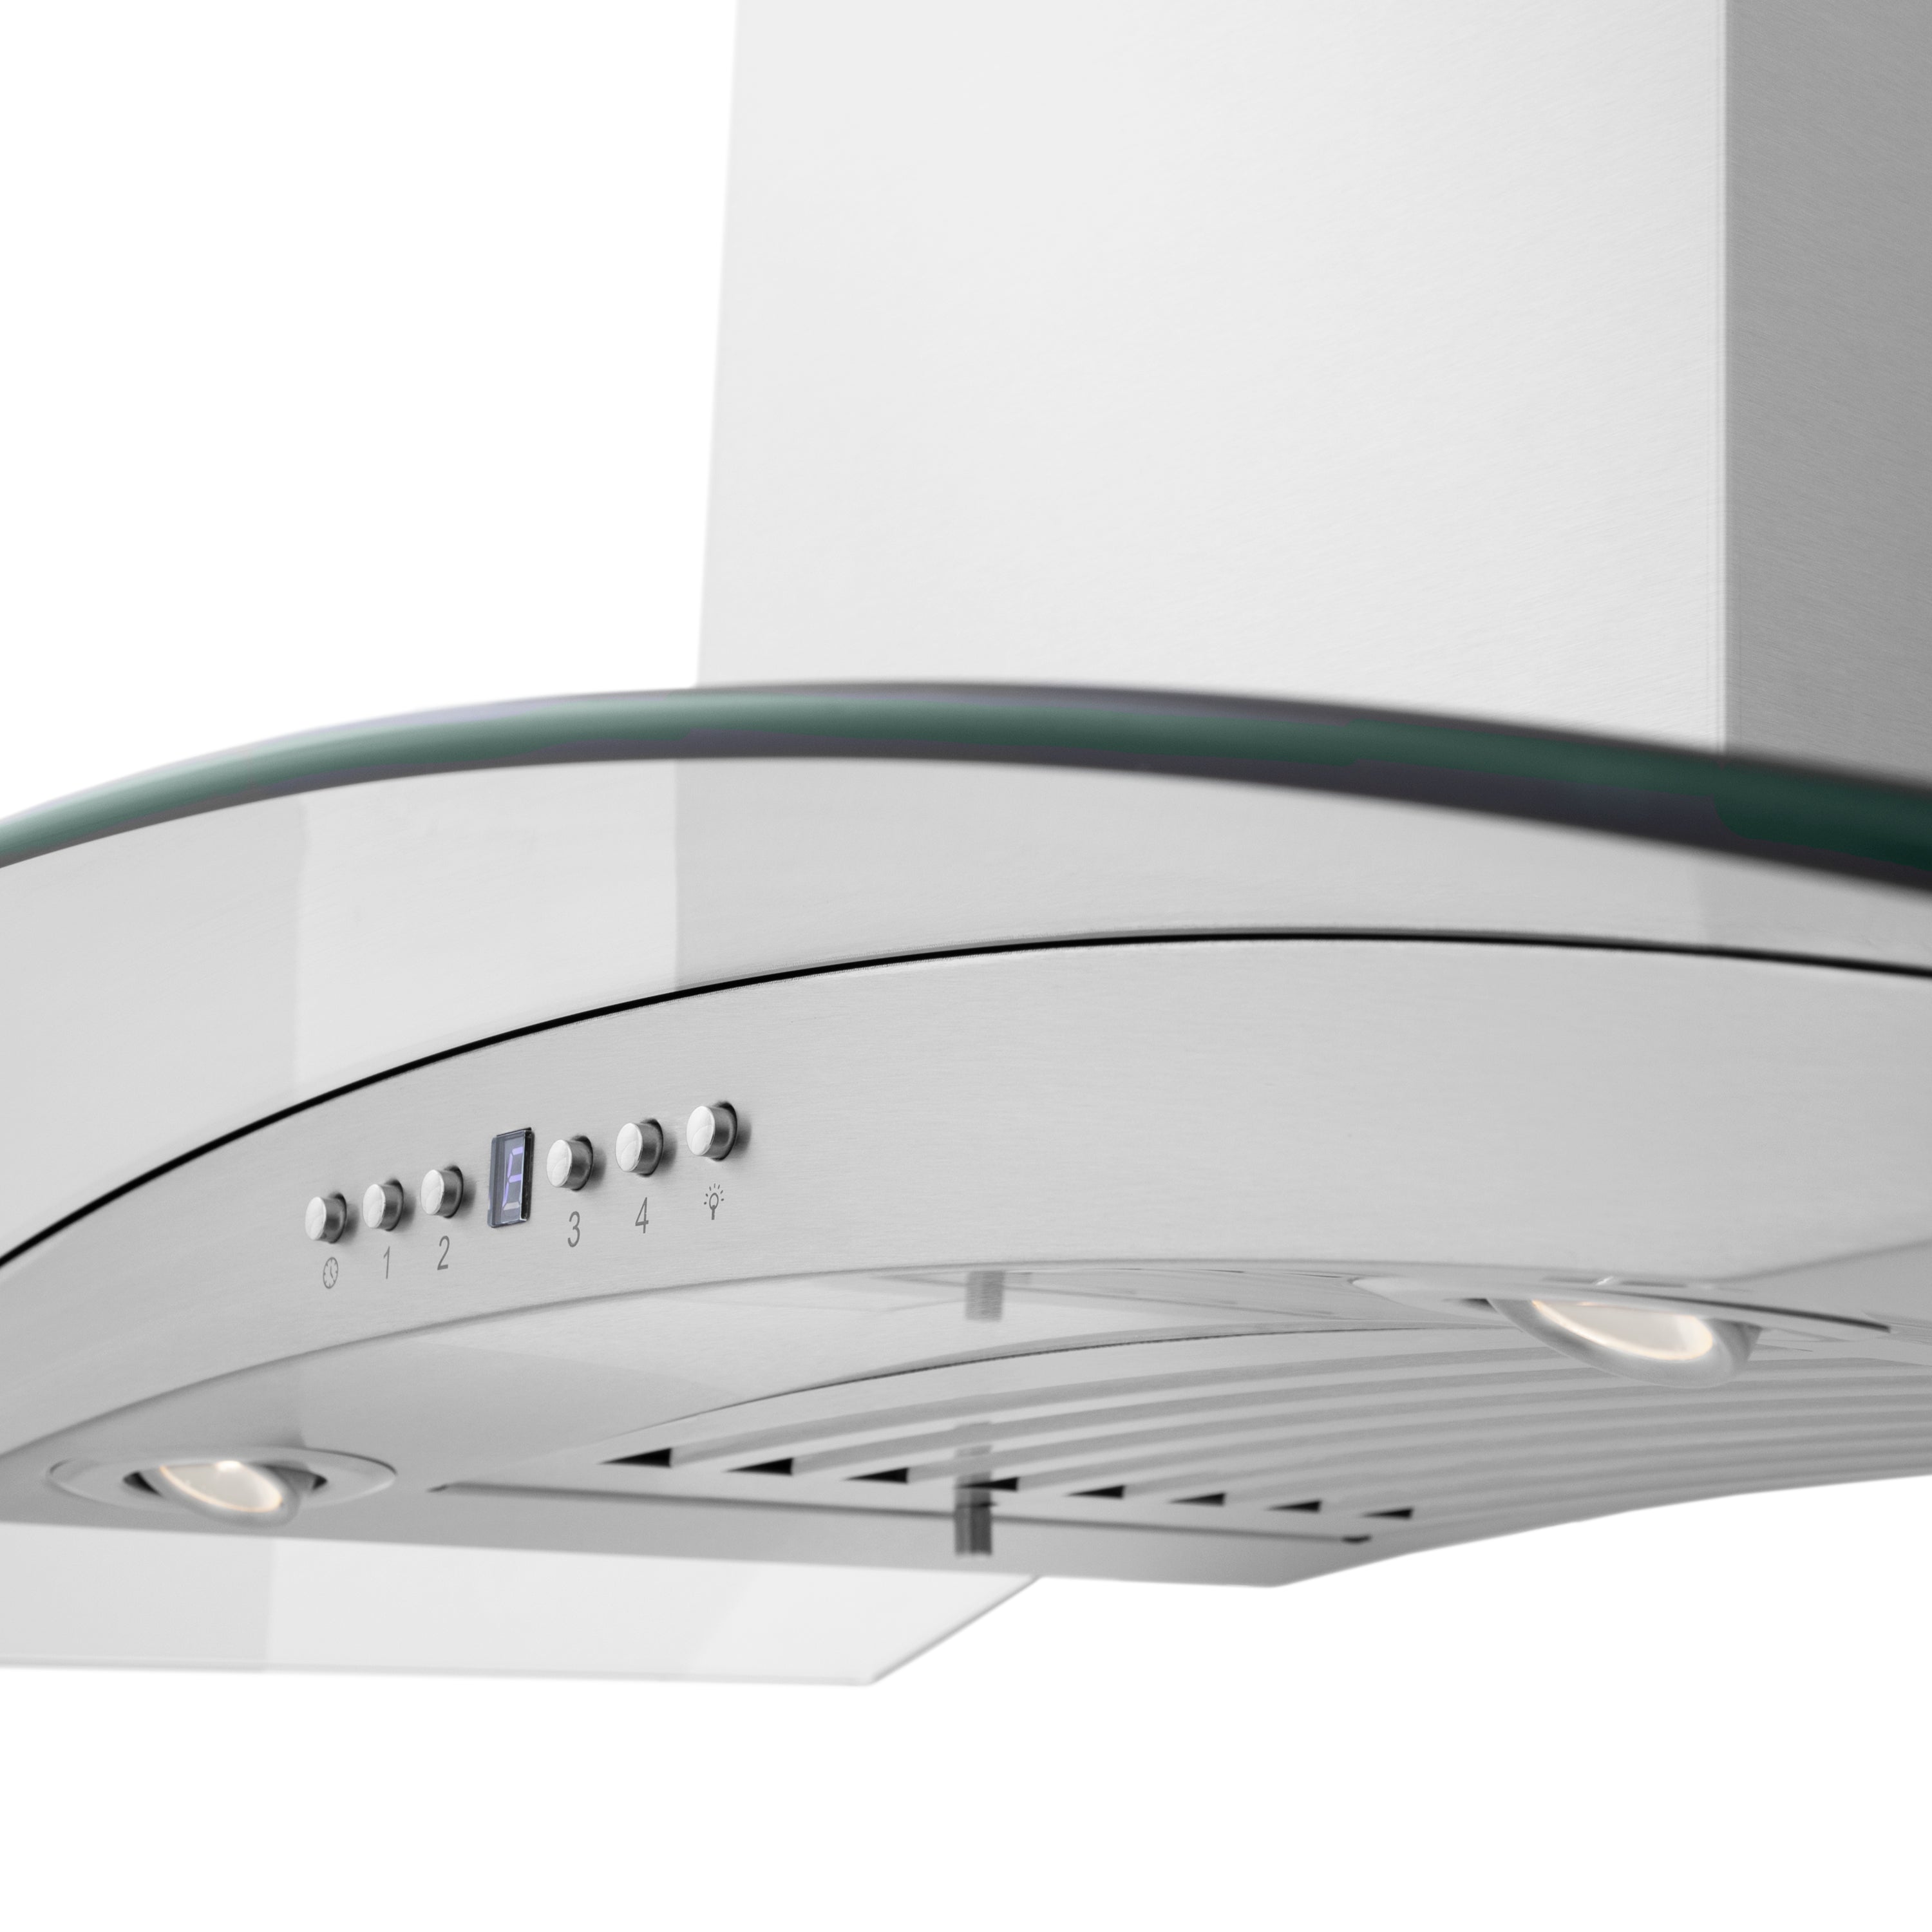 48" ZLINE CrownSound‚ Ducted Vent Wall Mount Range Hood in Stainless Steel with Built-in Bluetooth Speakers (KN4CRN-BT-48)